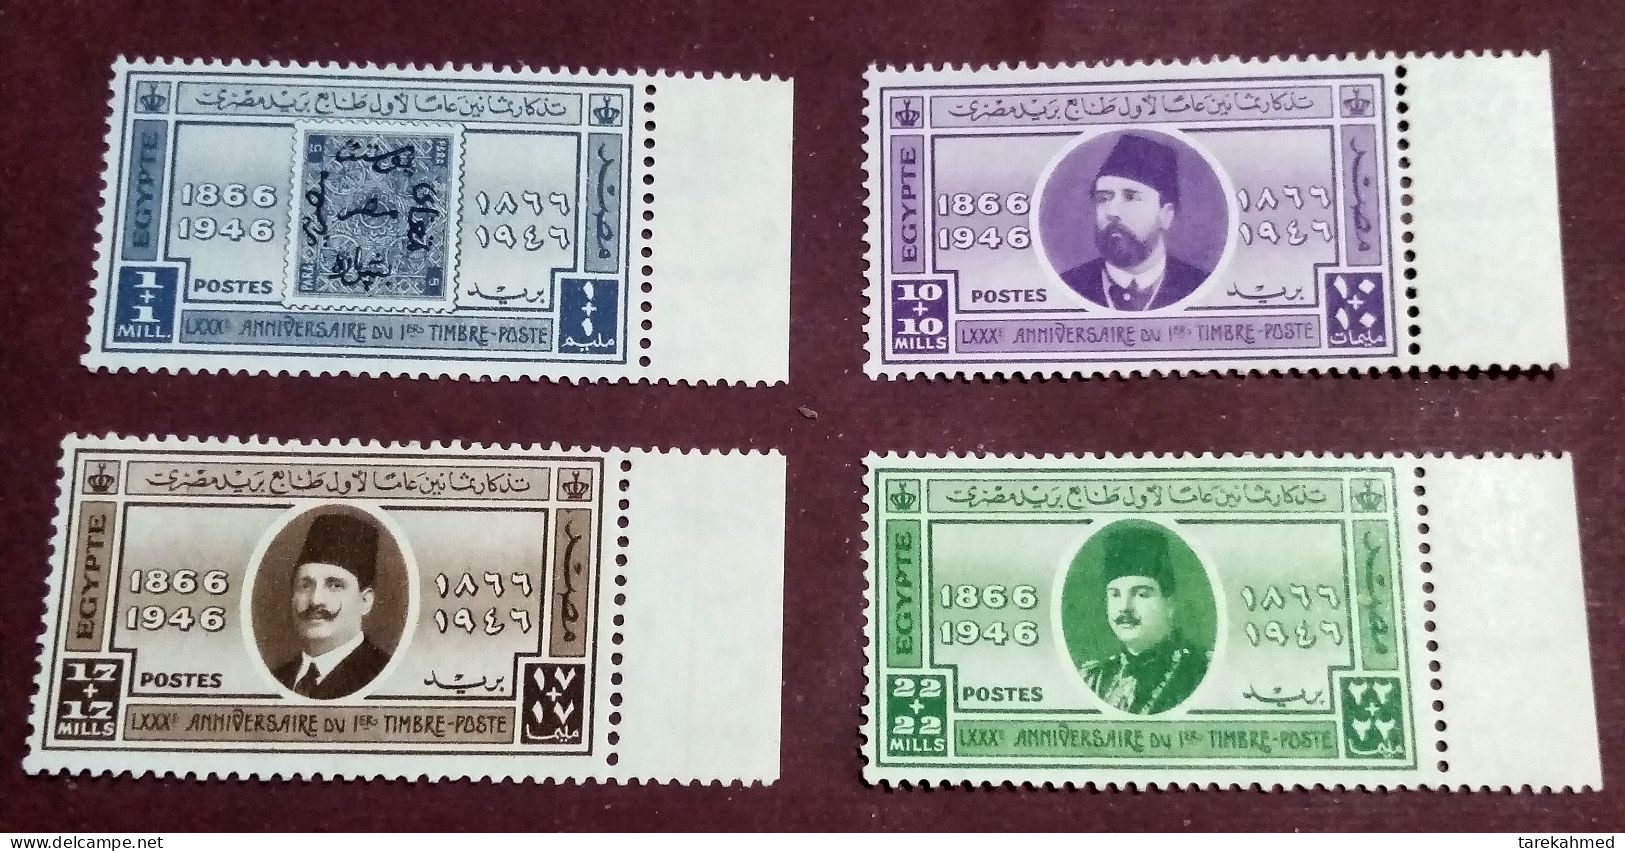 Egypt 1946 - Complete Set Of The 80th Anniv. Of Egypt’s 1st Postage Stamp - MNH With Margin, Original Gum. - Nuevos